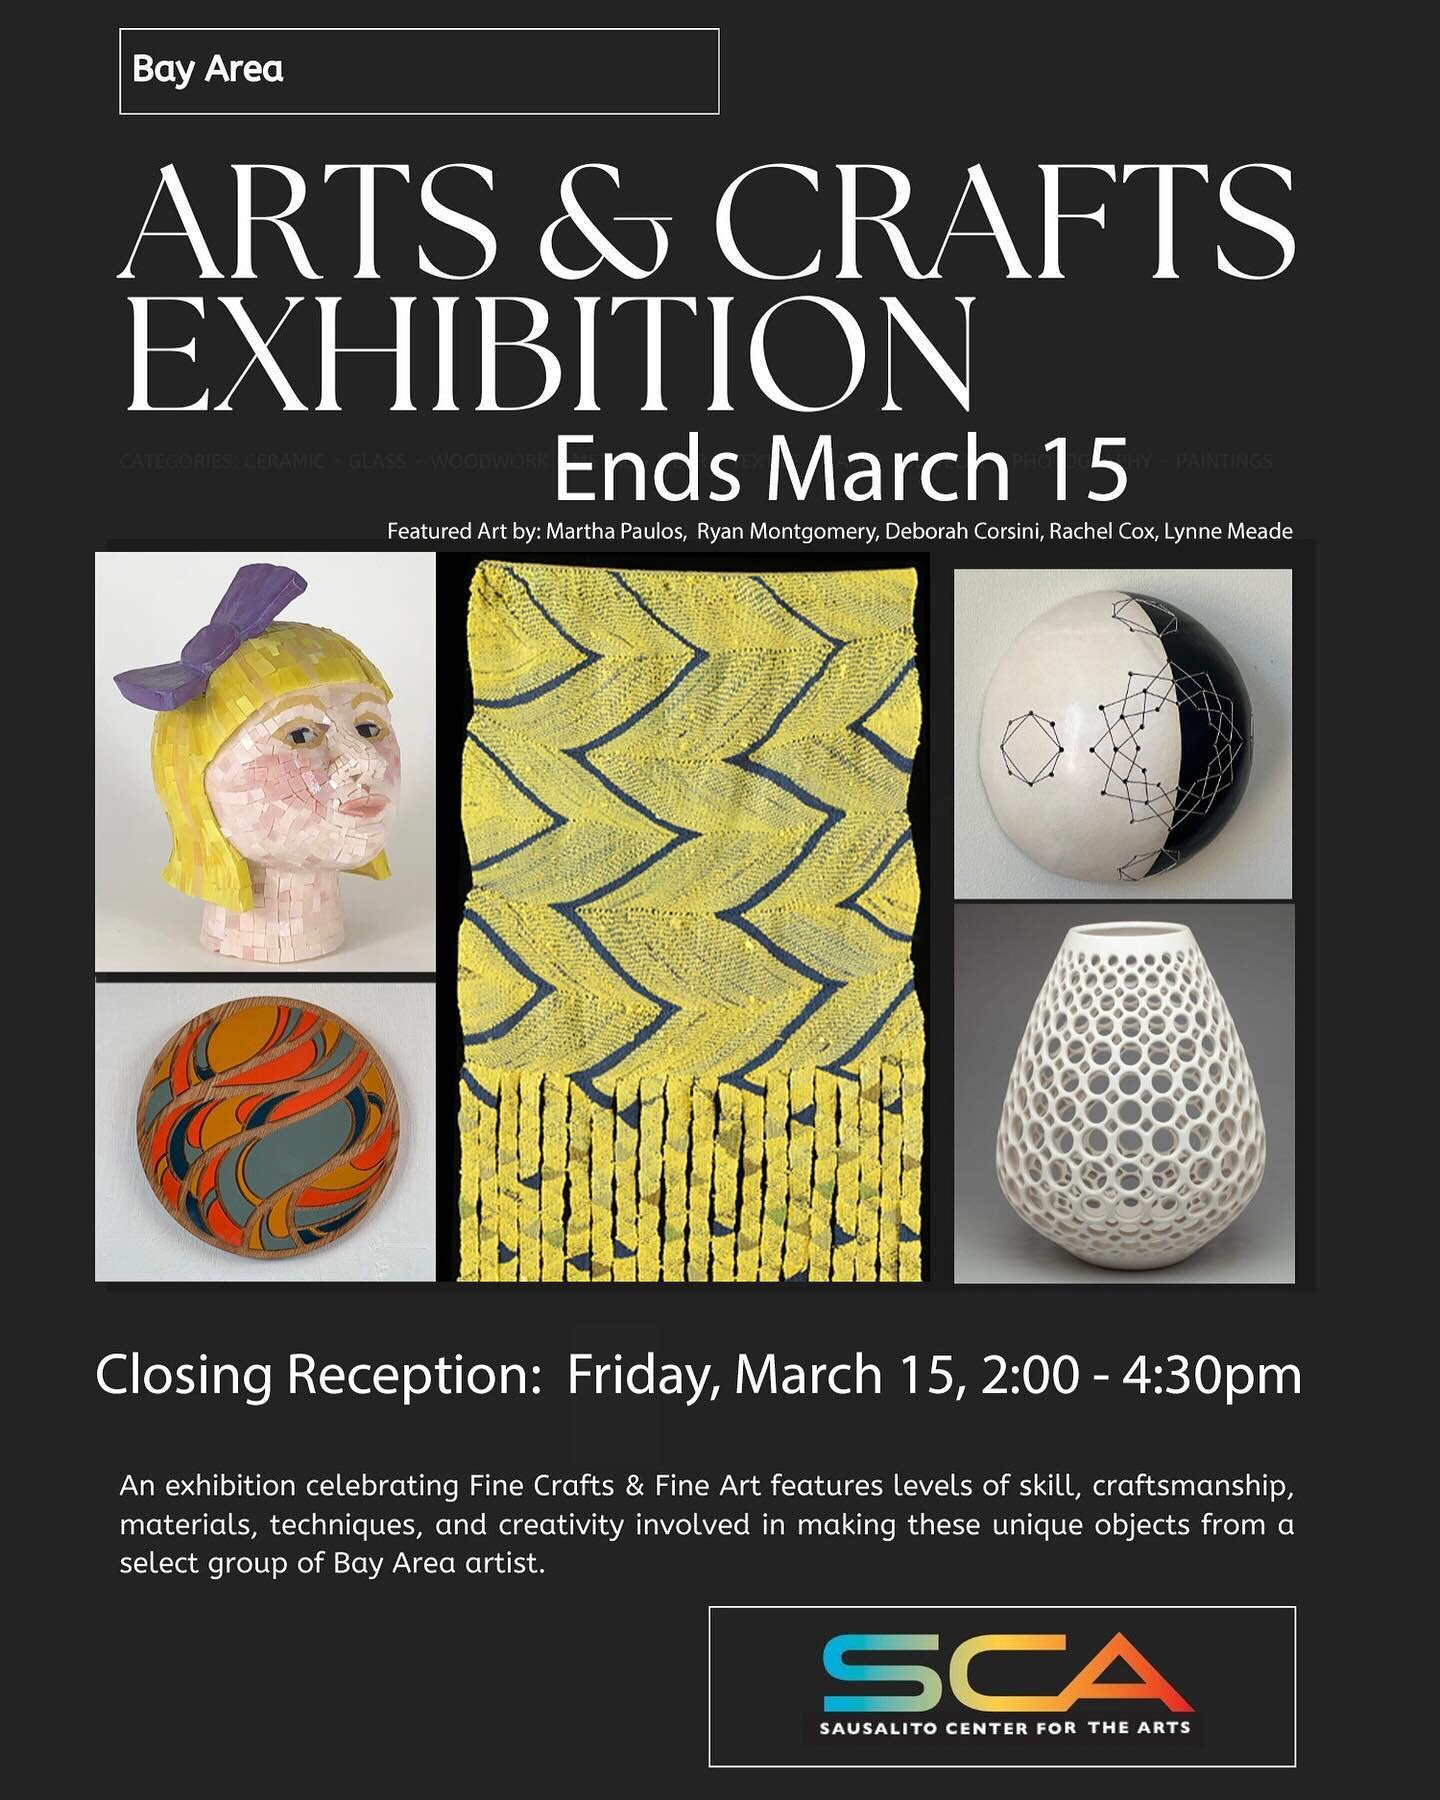 This is the last week to see my work in the Bay Area Arts &amp; Crafts Exhibition @sausalito_center_for_the_arts. My &ldquo;Half Moon&rdquo; ceramic wall sculpture with thread design got some more love in this flyer (top right) for their closing rece